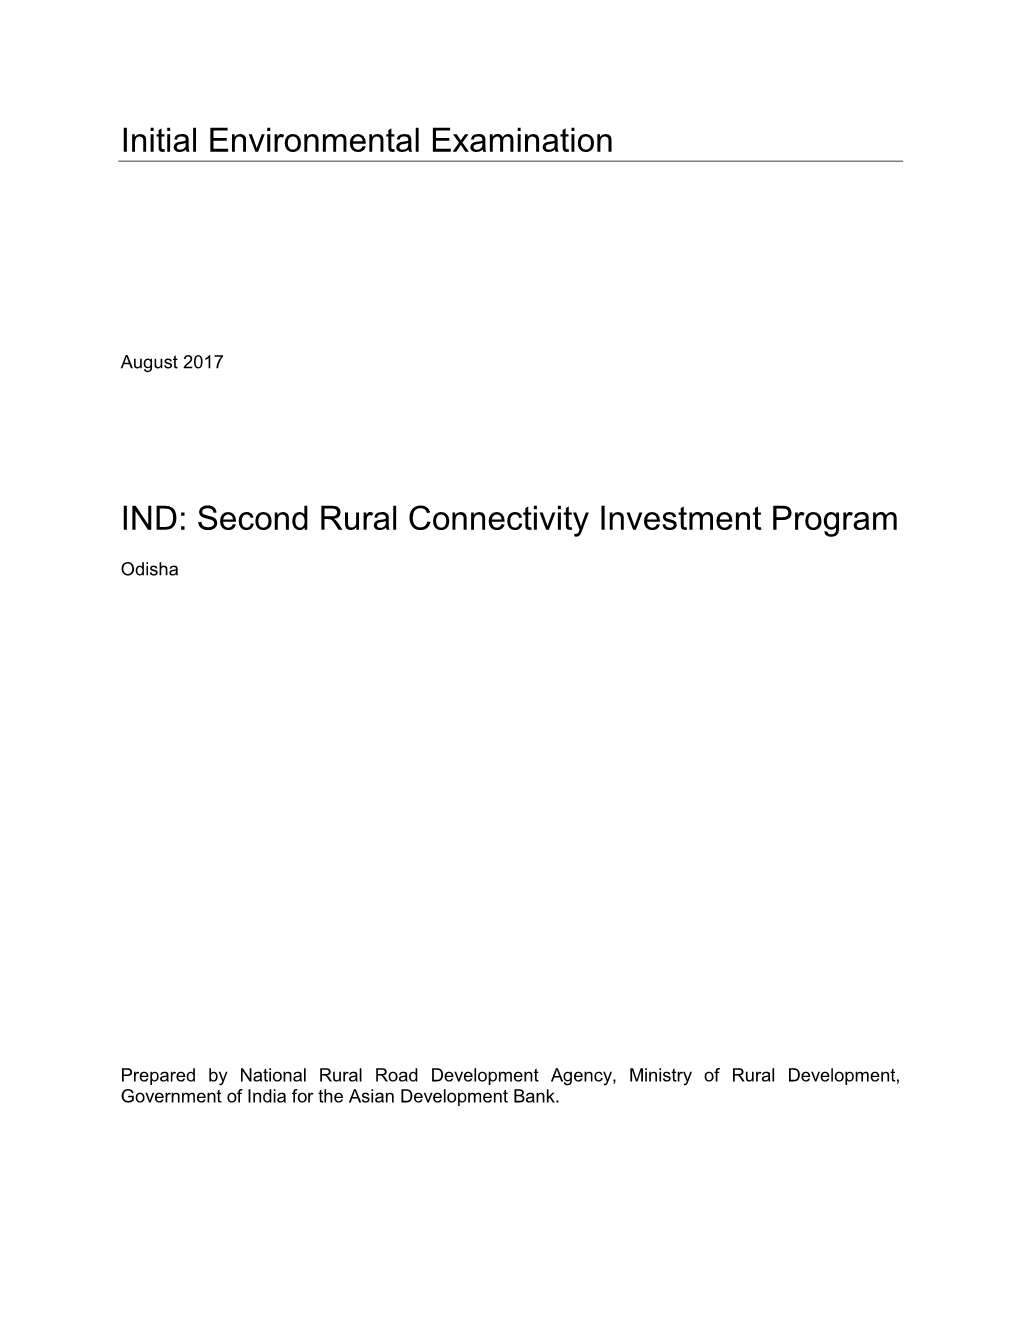 Initial Environmental Examination IND: Second Rural Connectivity